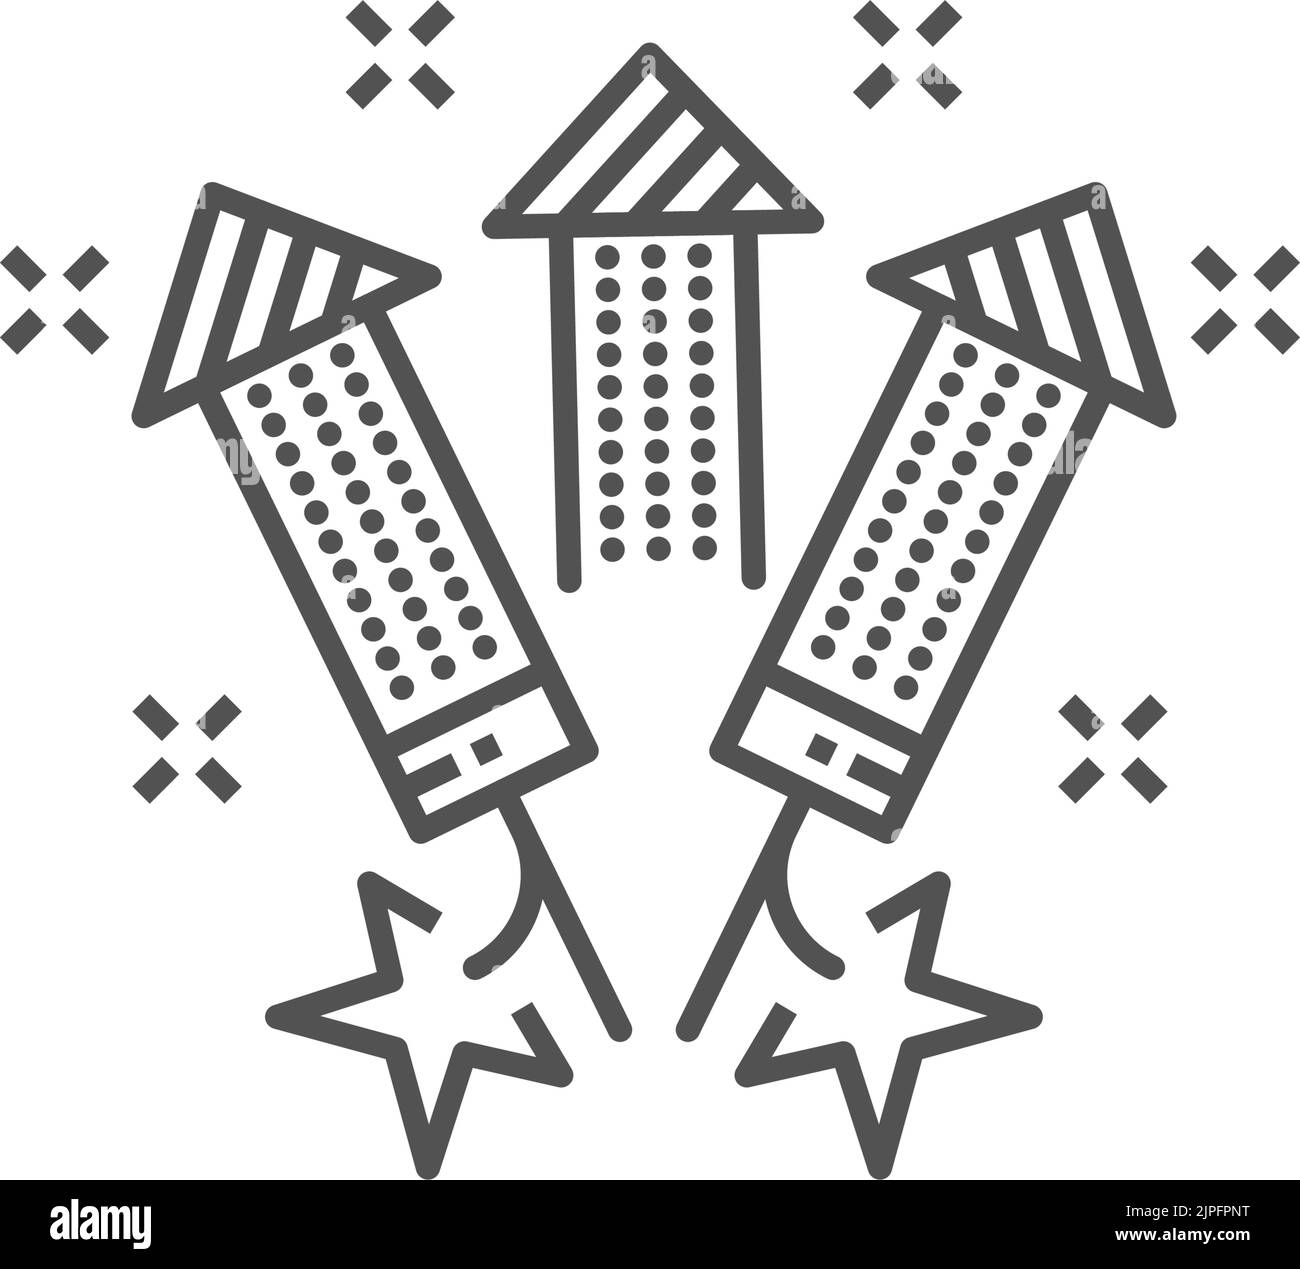 Rocket firecrackers isolated New Year and Christmas fireworks monochrome line art icon. Vector explosion crackers, Chinese festival celebration objects. Pyrotechnics, party petards, birthday crackers Stock Vector